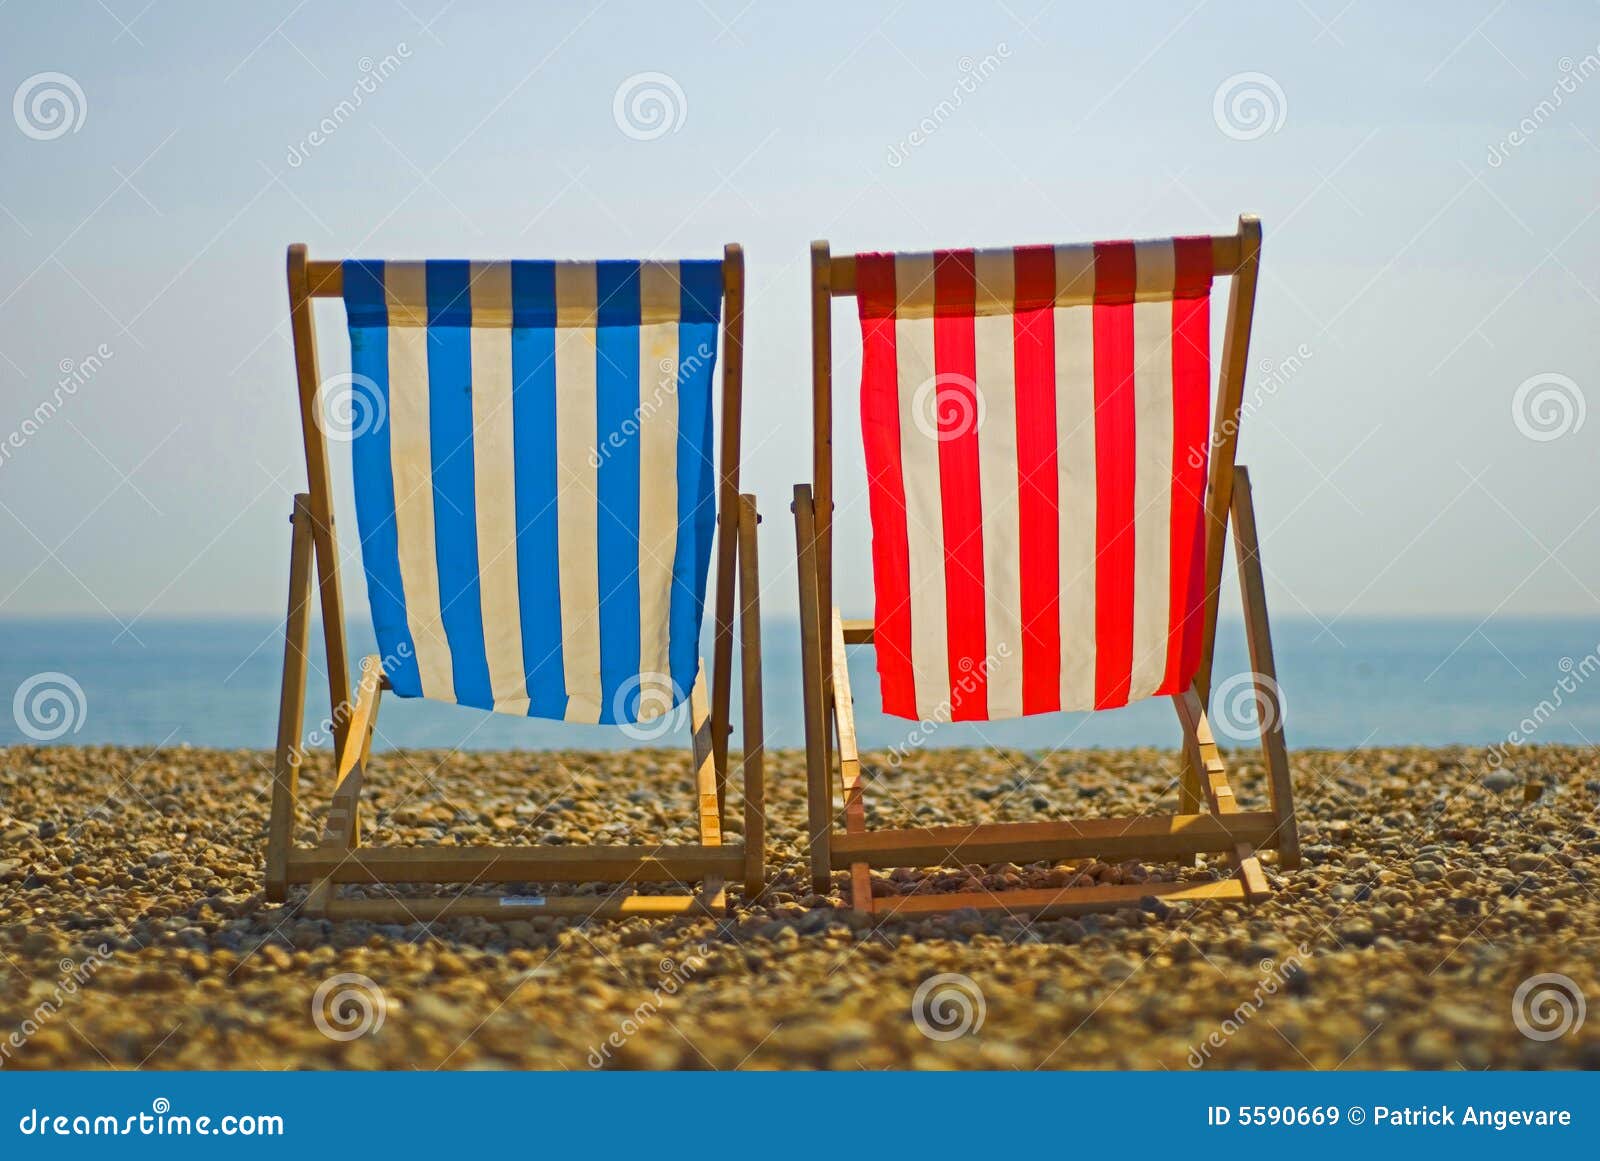 colorful beach chairs